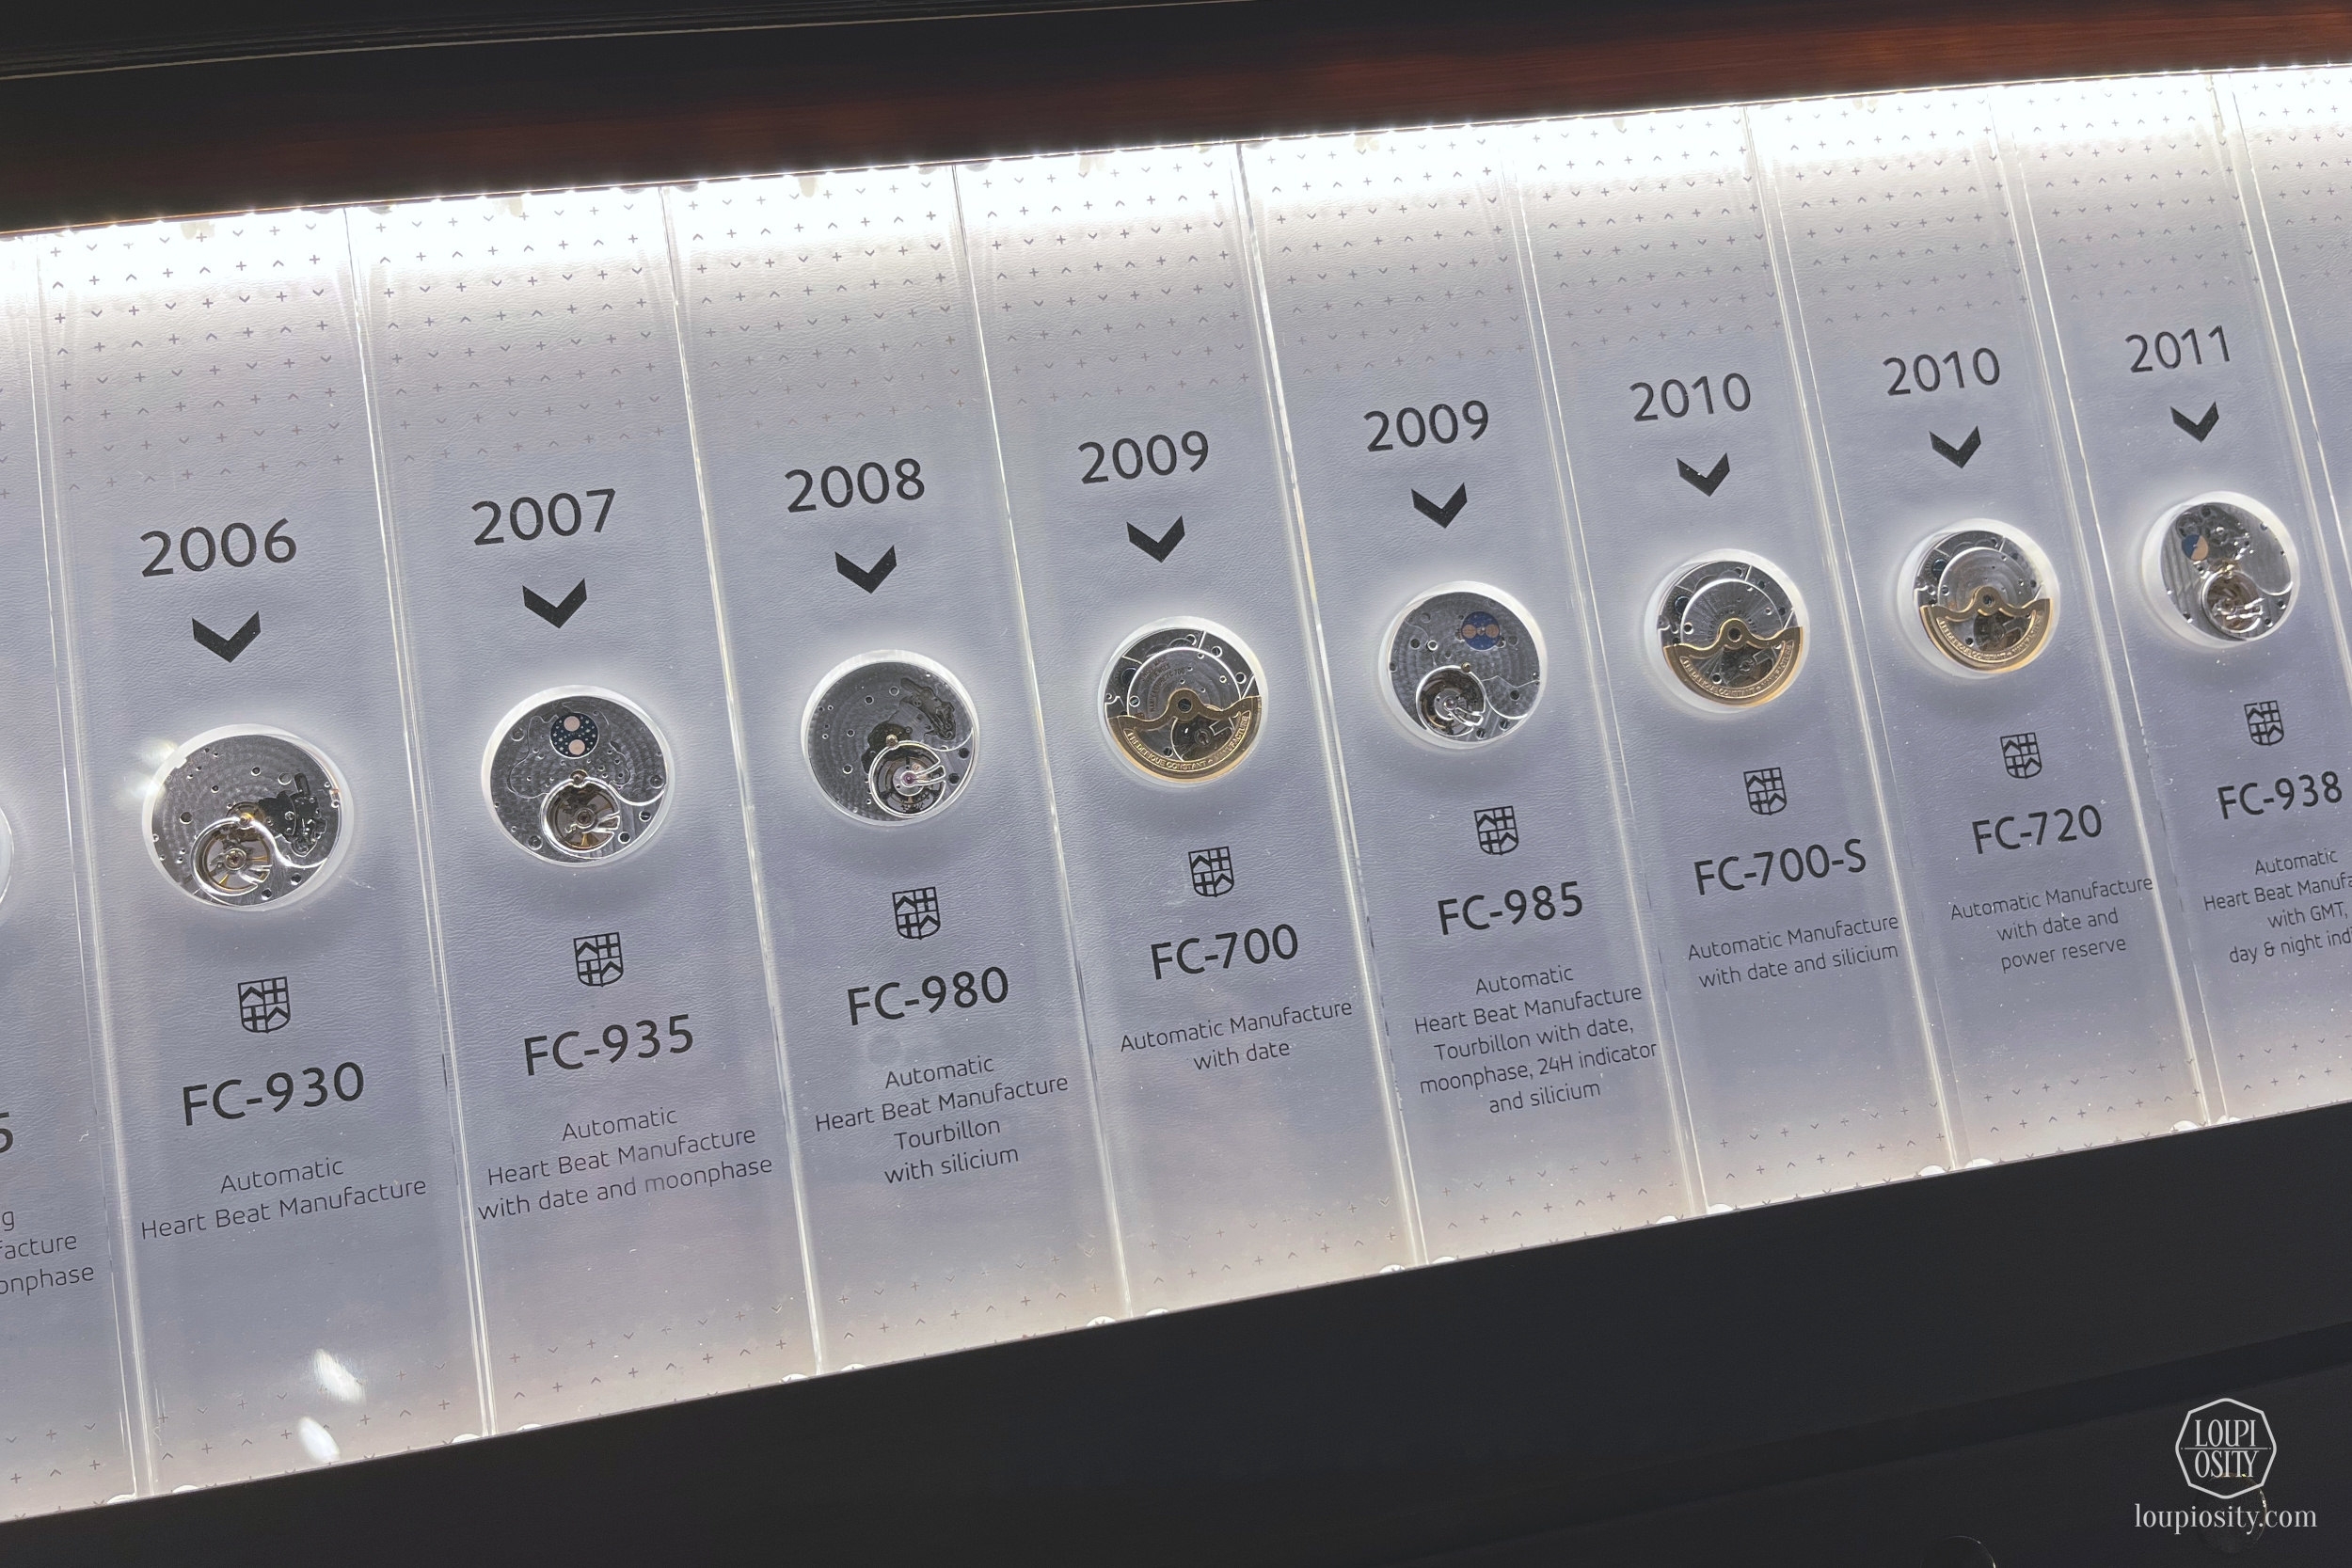 Frederique Constant Manufacture Experience, a few of the FC calibers